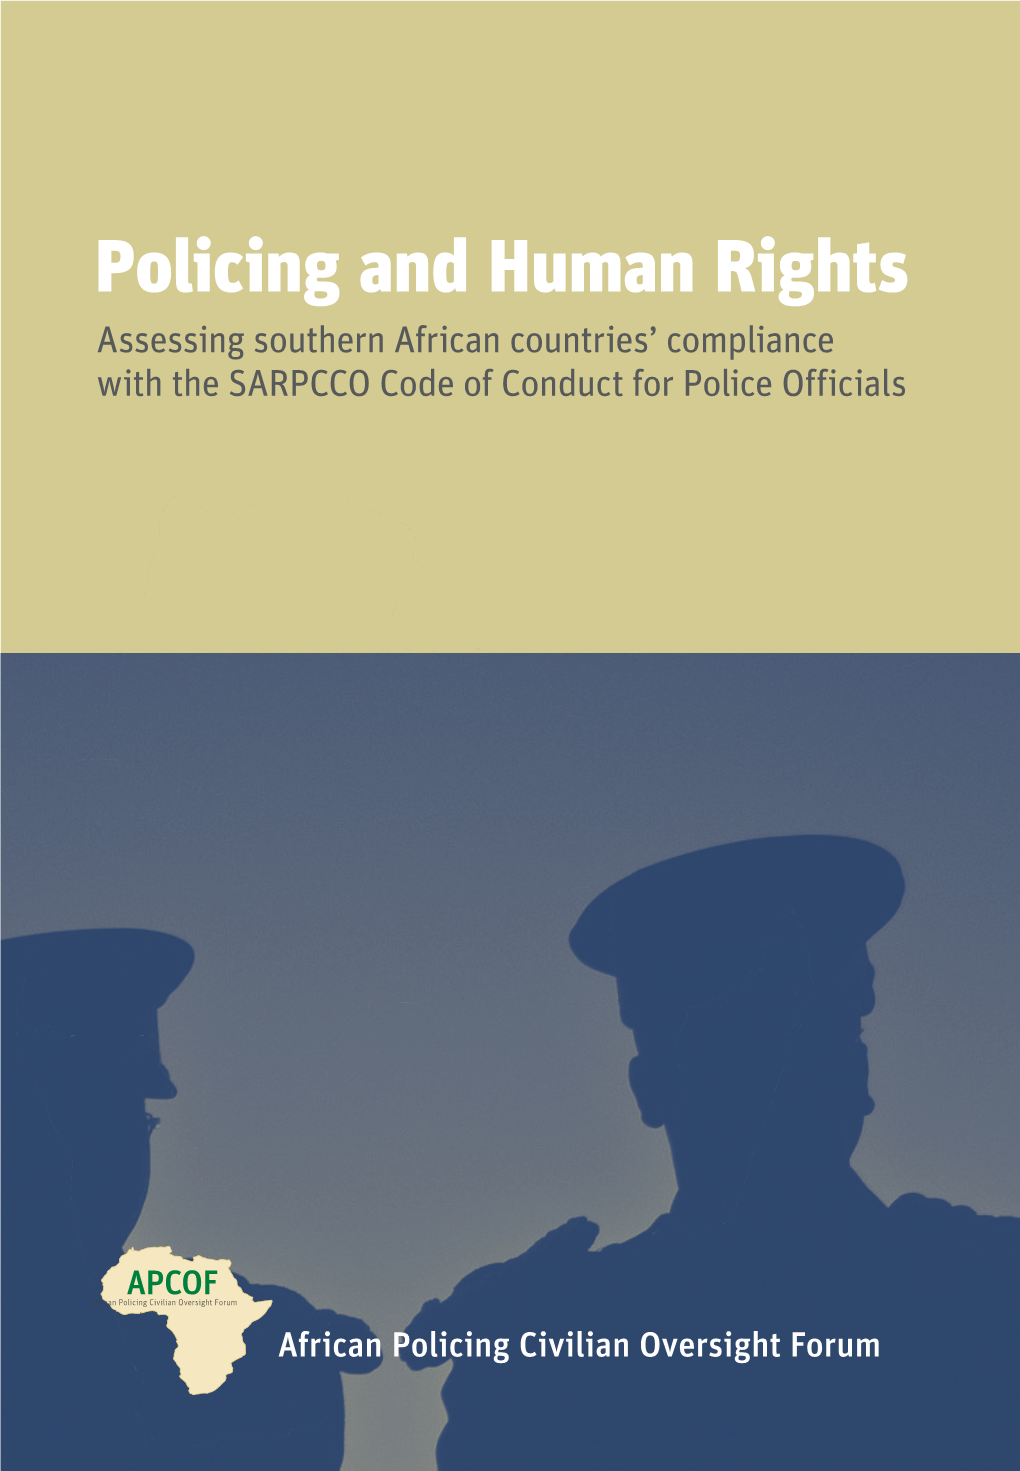 With the SARPCCO Code of Conduct for Police Officials